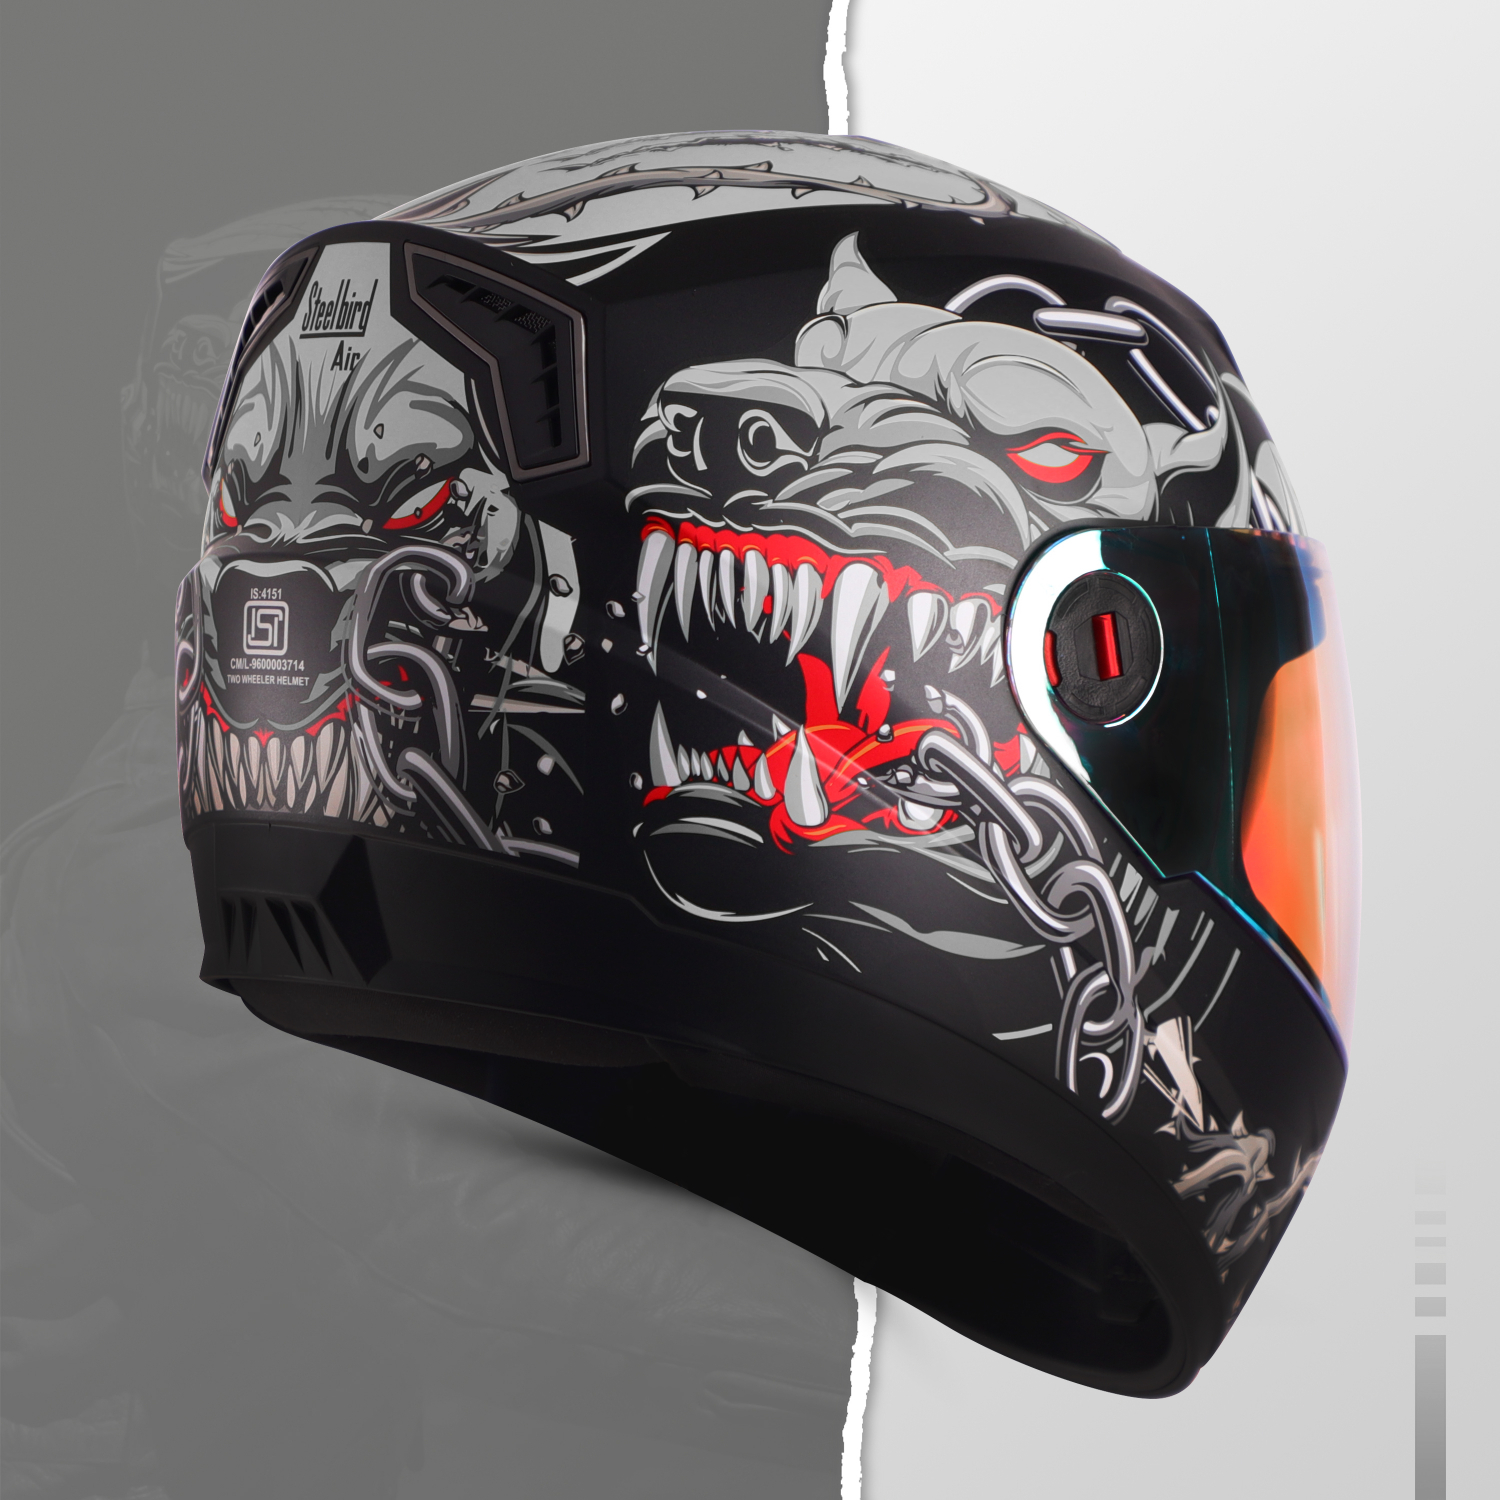 Steelbird SBA-1 Angry Dog ISI Certified Full Face Graphic Helmet For Men And Women With Inner Smoke Sun Shield (Glossy Black Grey With Night Vision Gold Visor)